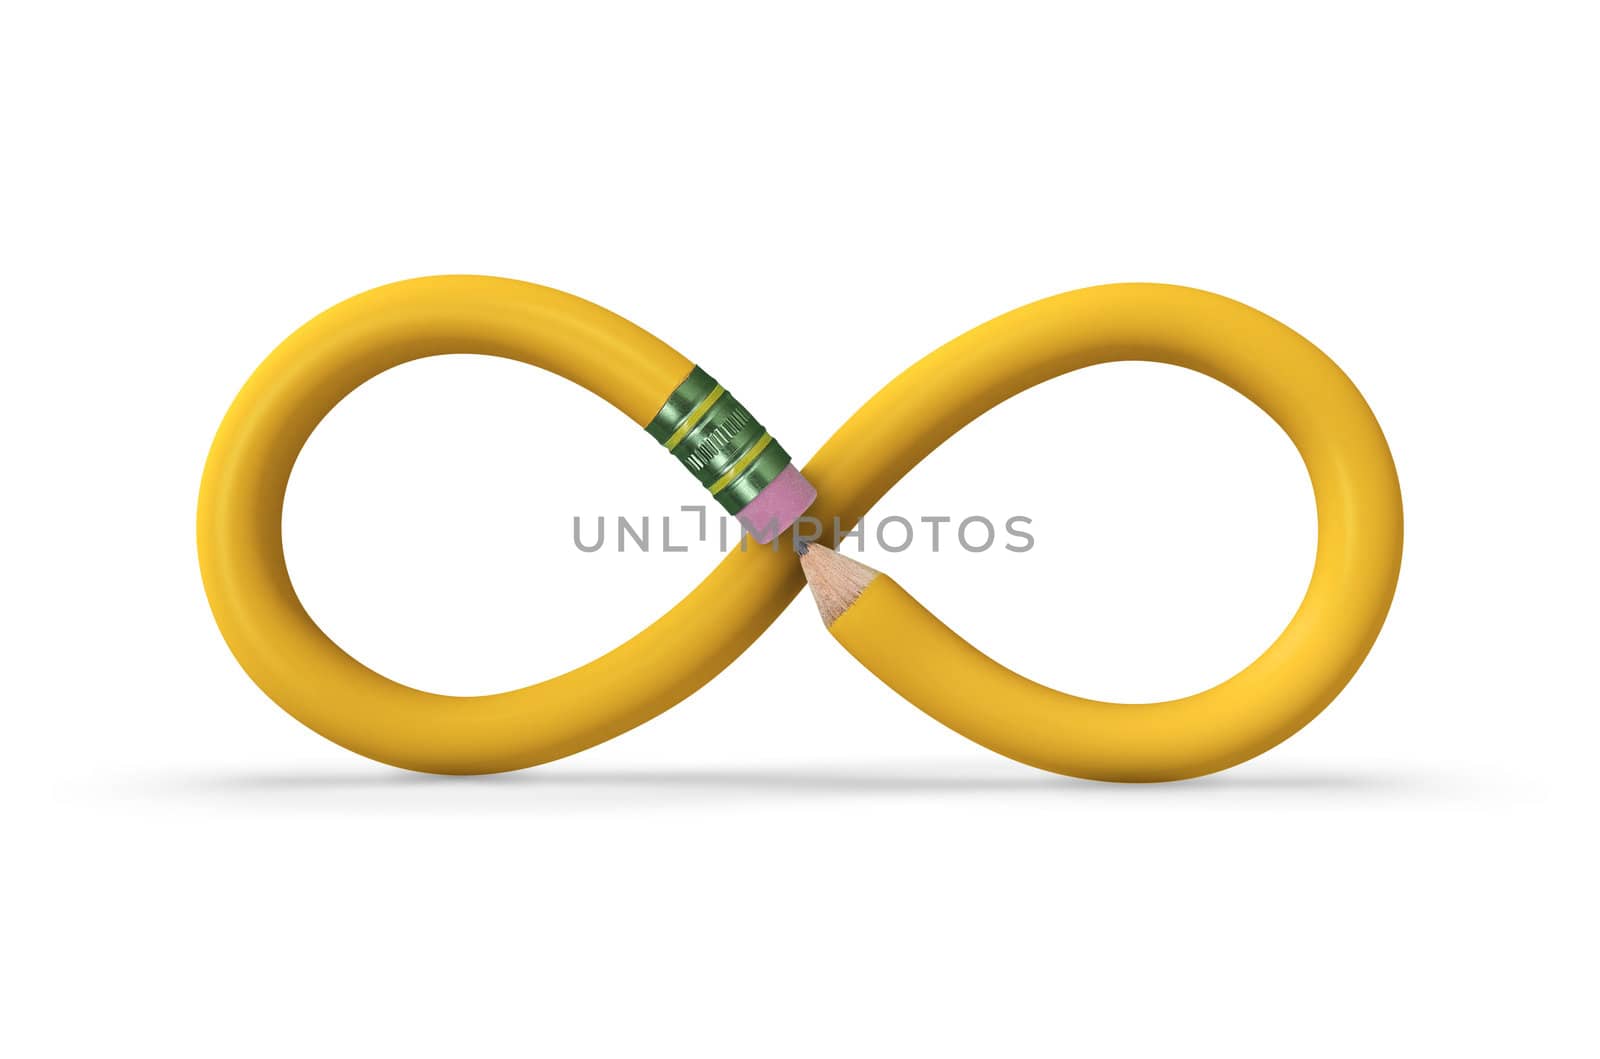 A yellow pencil in the shape of an infinity symbol on white with drop shadow. Includes clipping path.